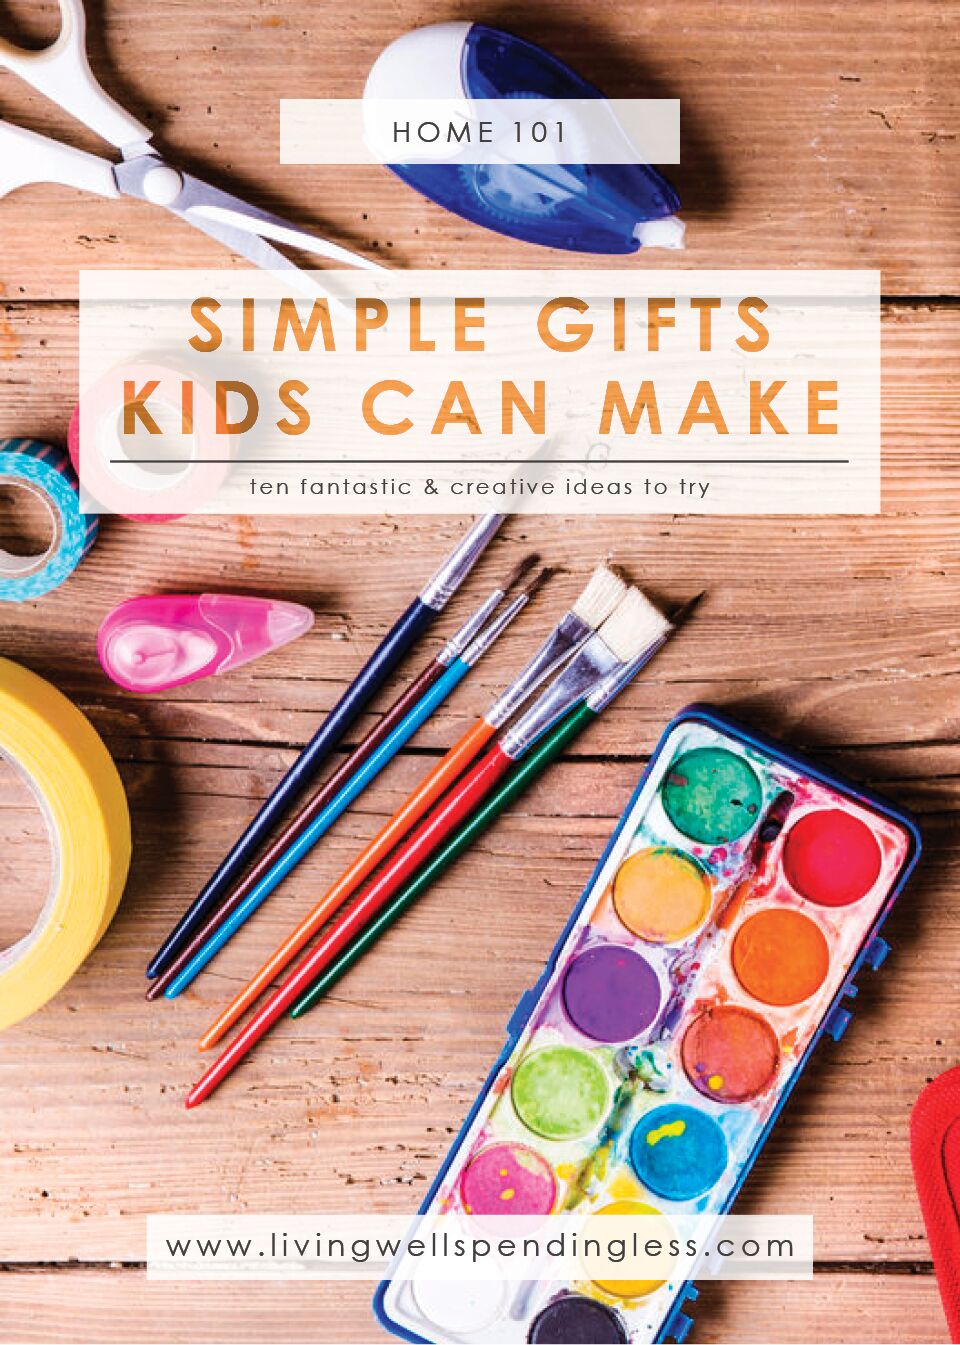 10 Simple Gifts Kids Can Make  Living Well Spending Less®